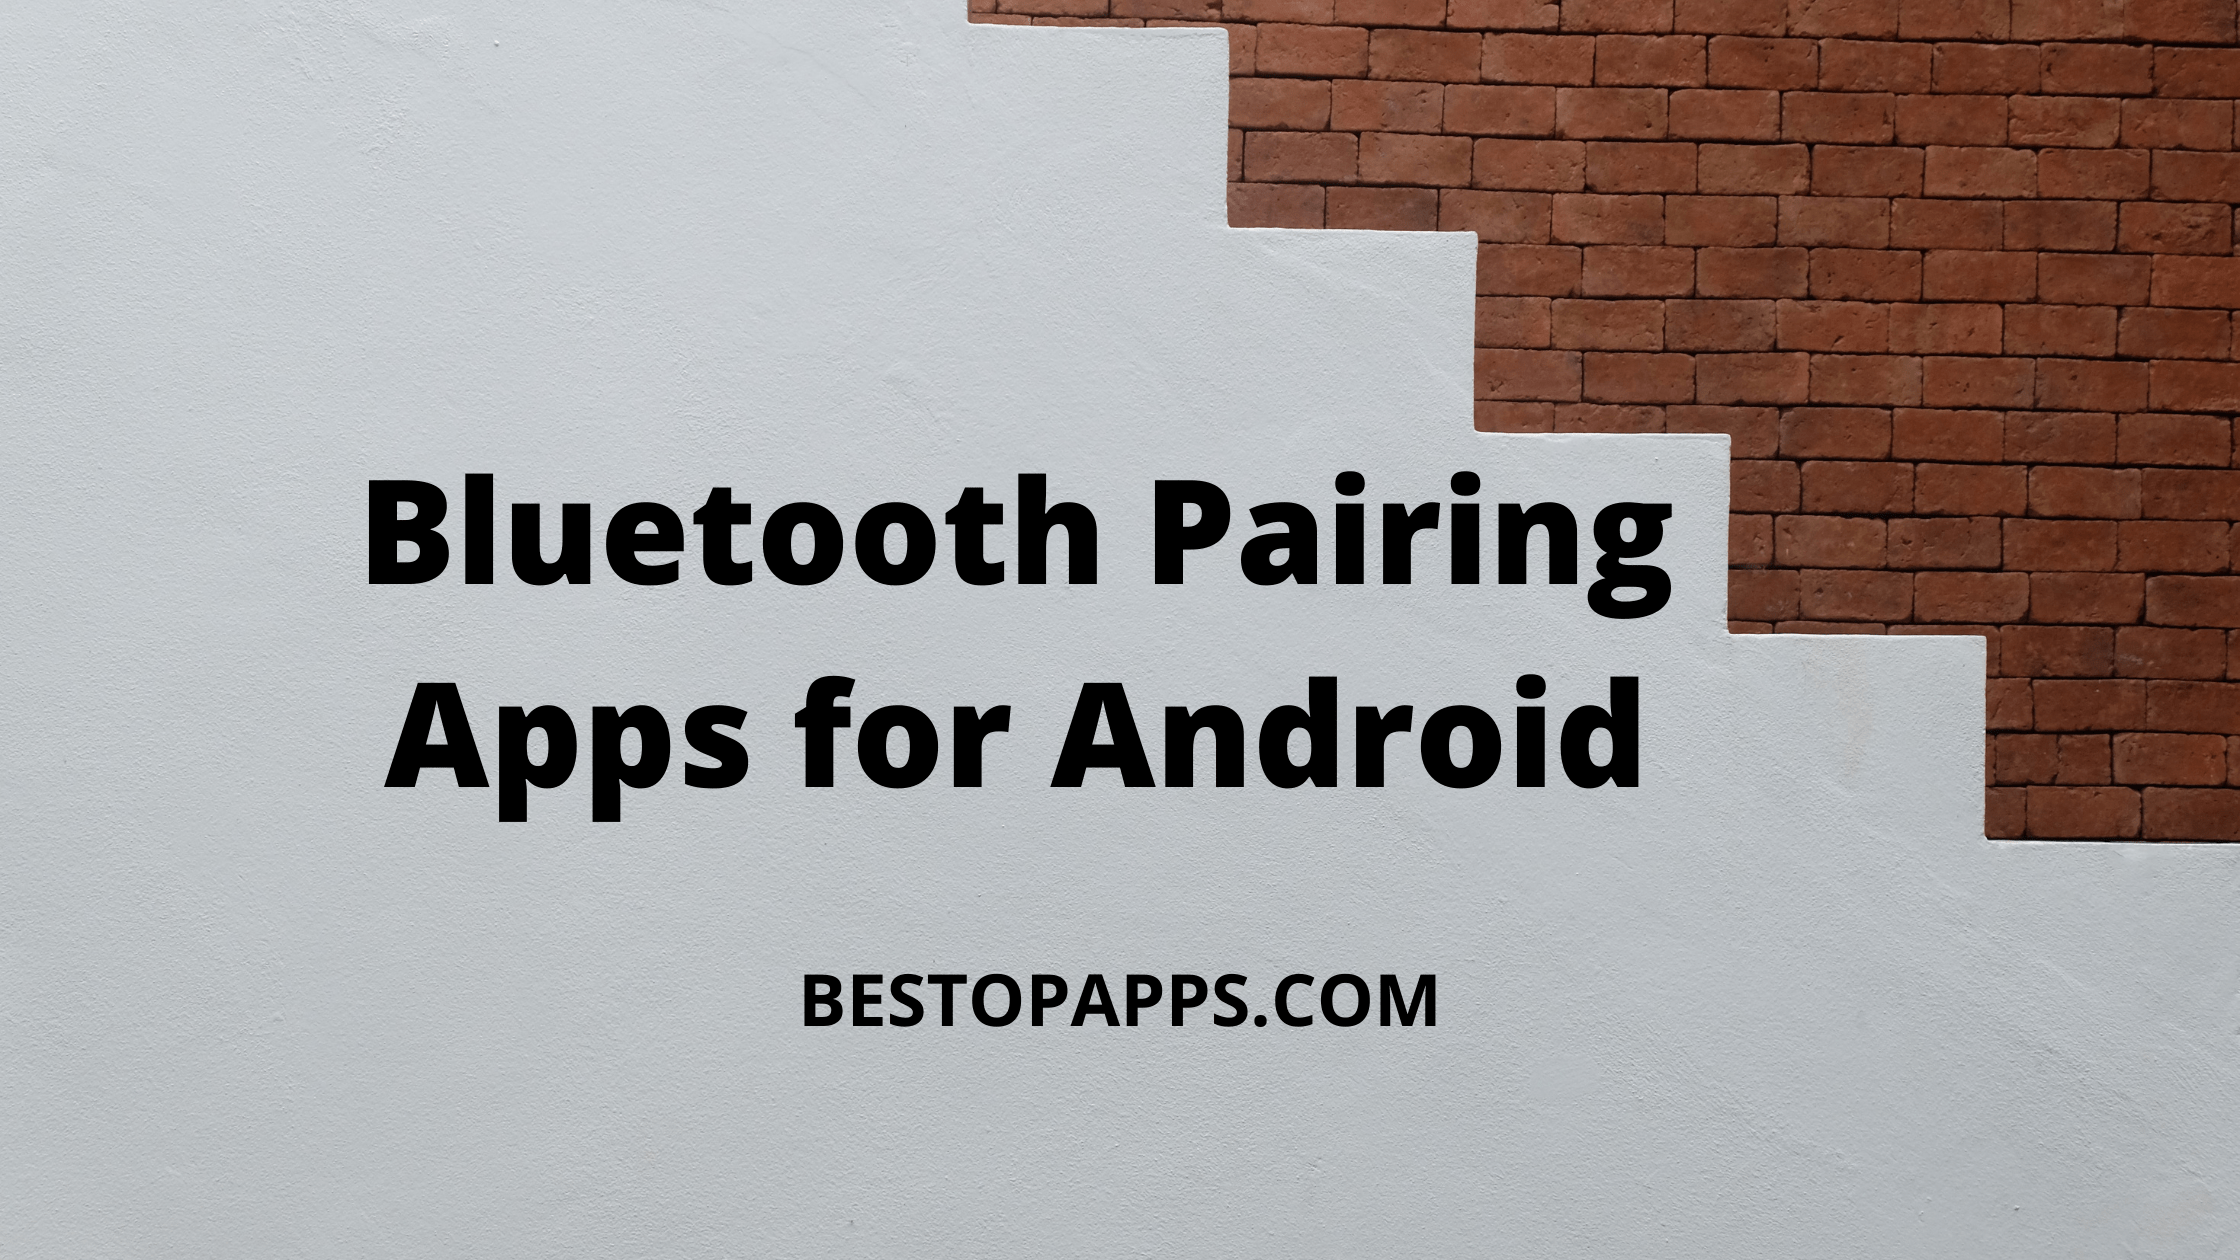 Bluetooth Pairing Apps for Android